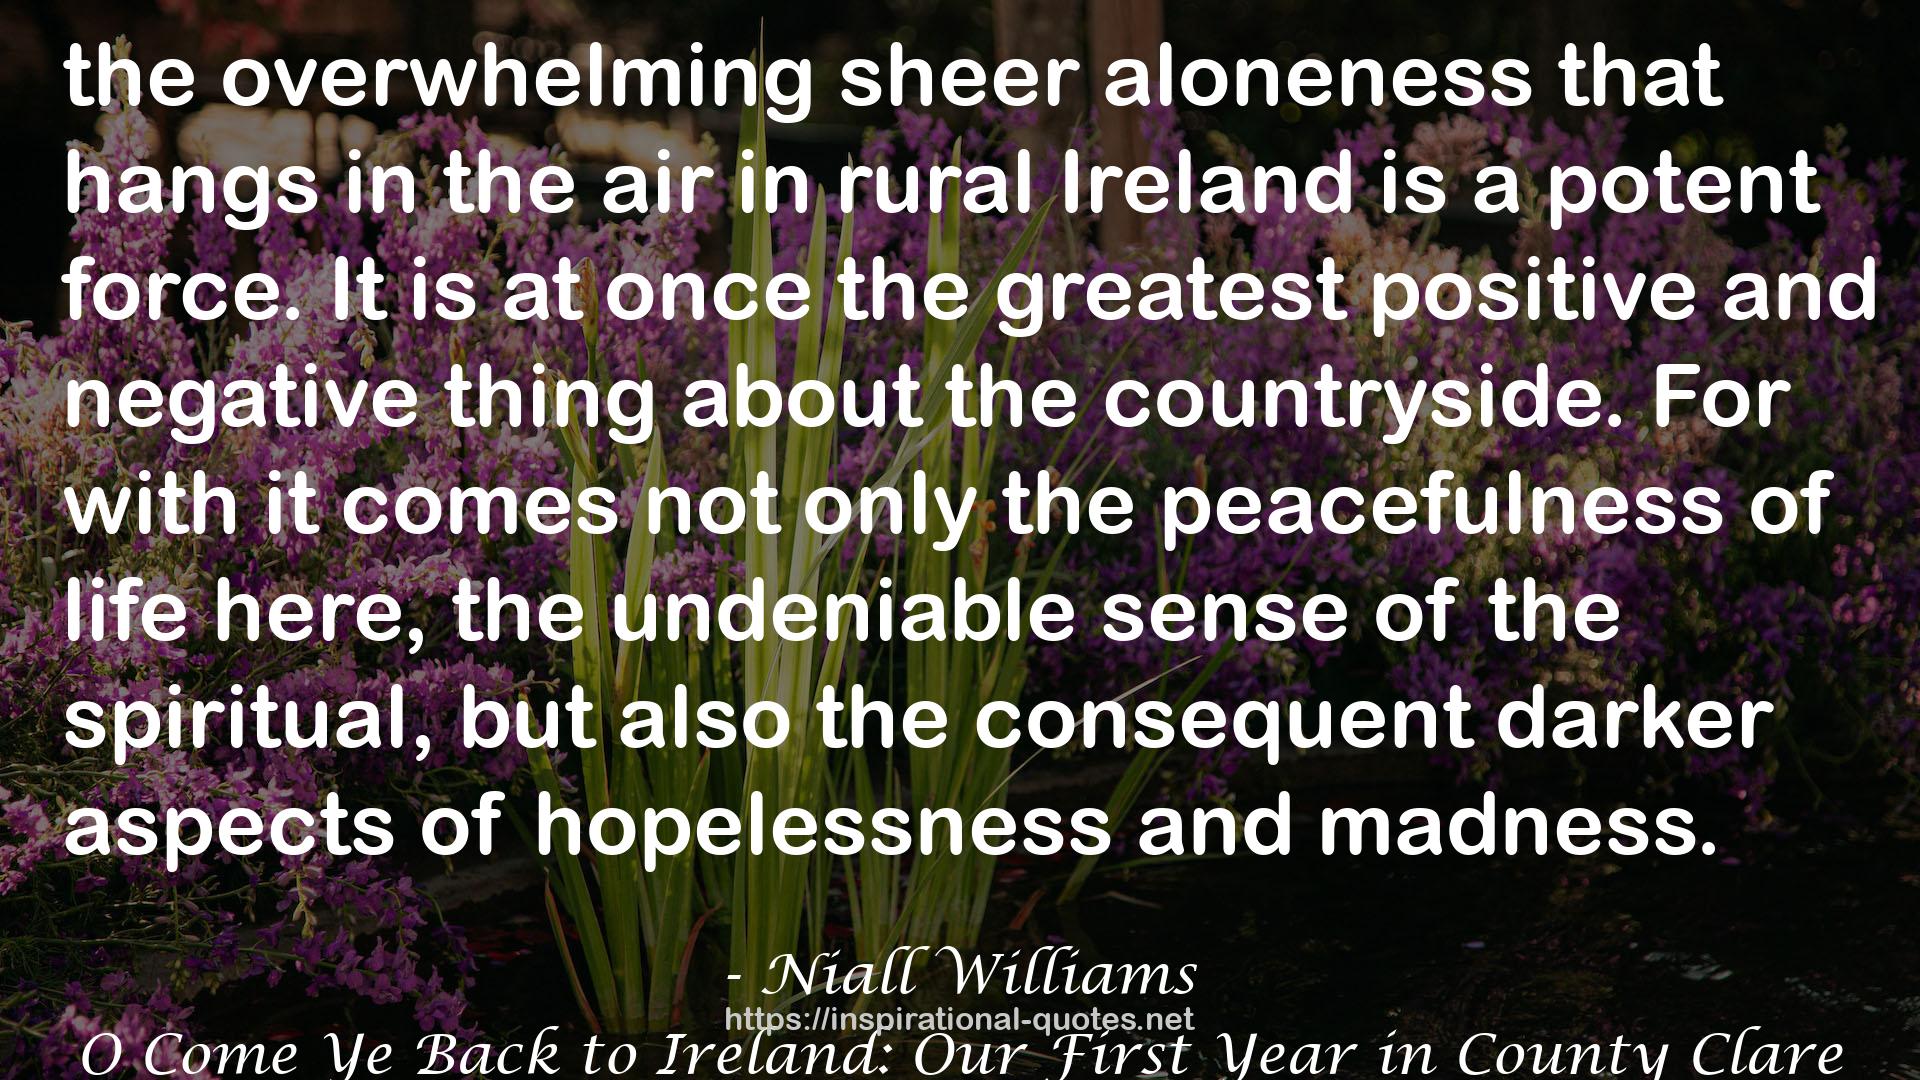 O Come Ye Back to Ireland: Our First Year in County Clare QUOTES